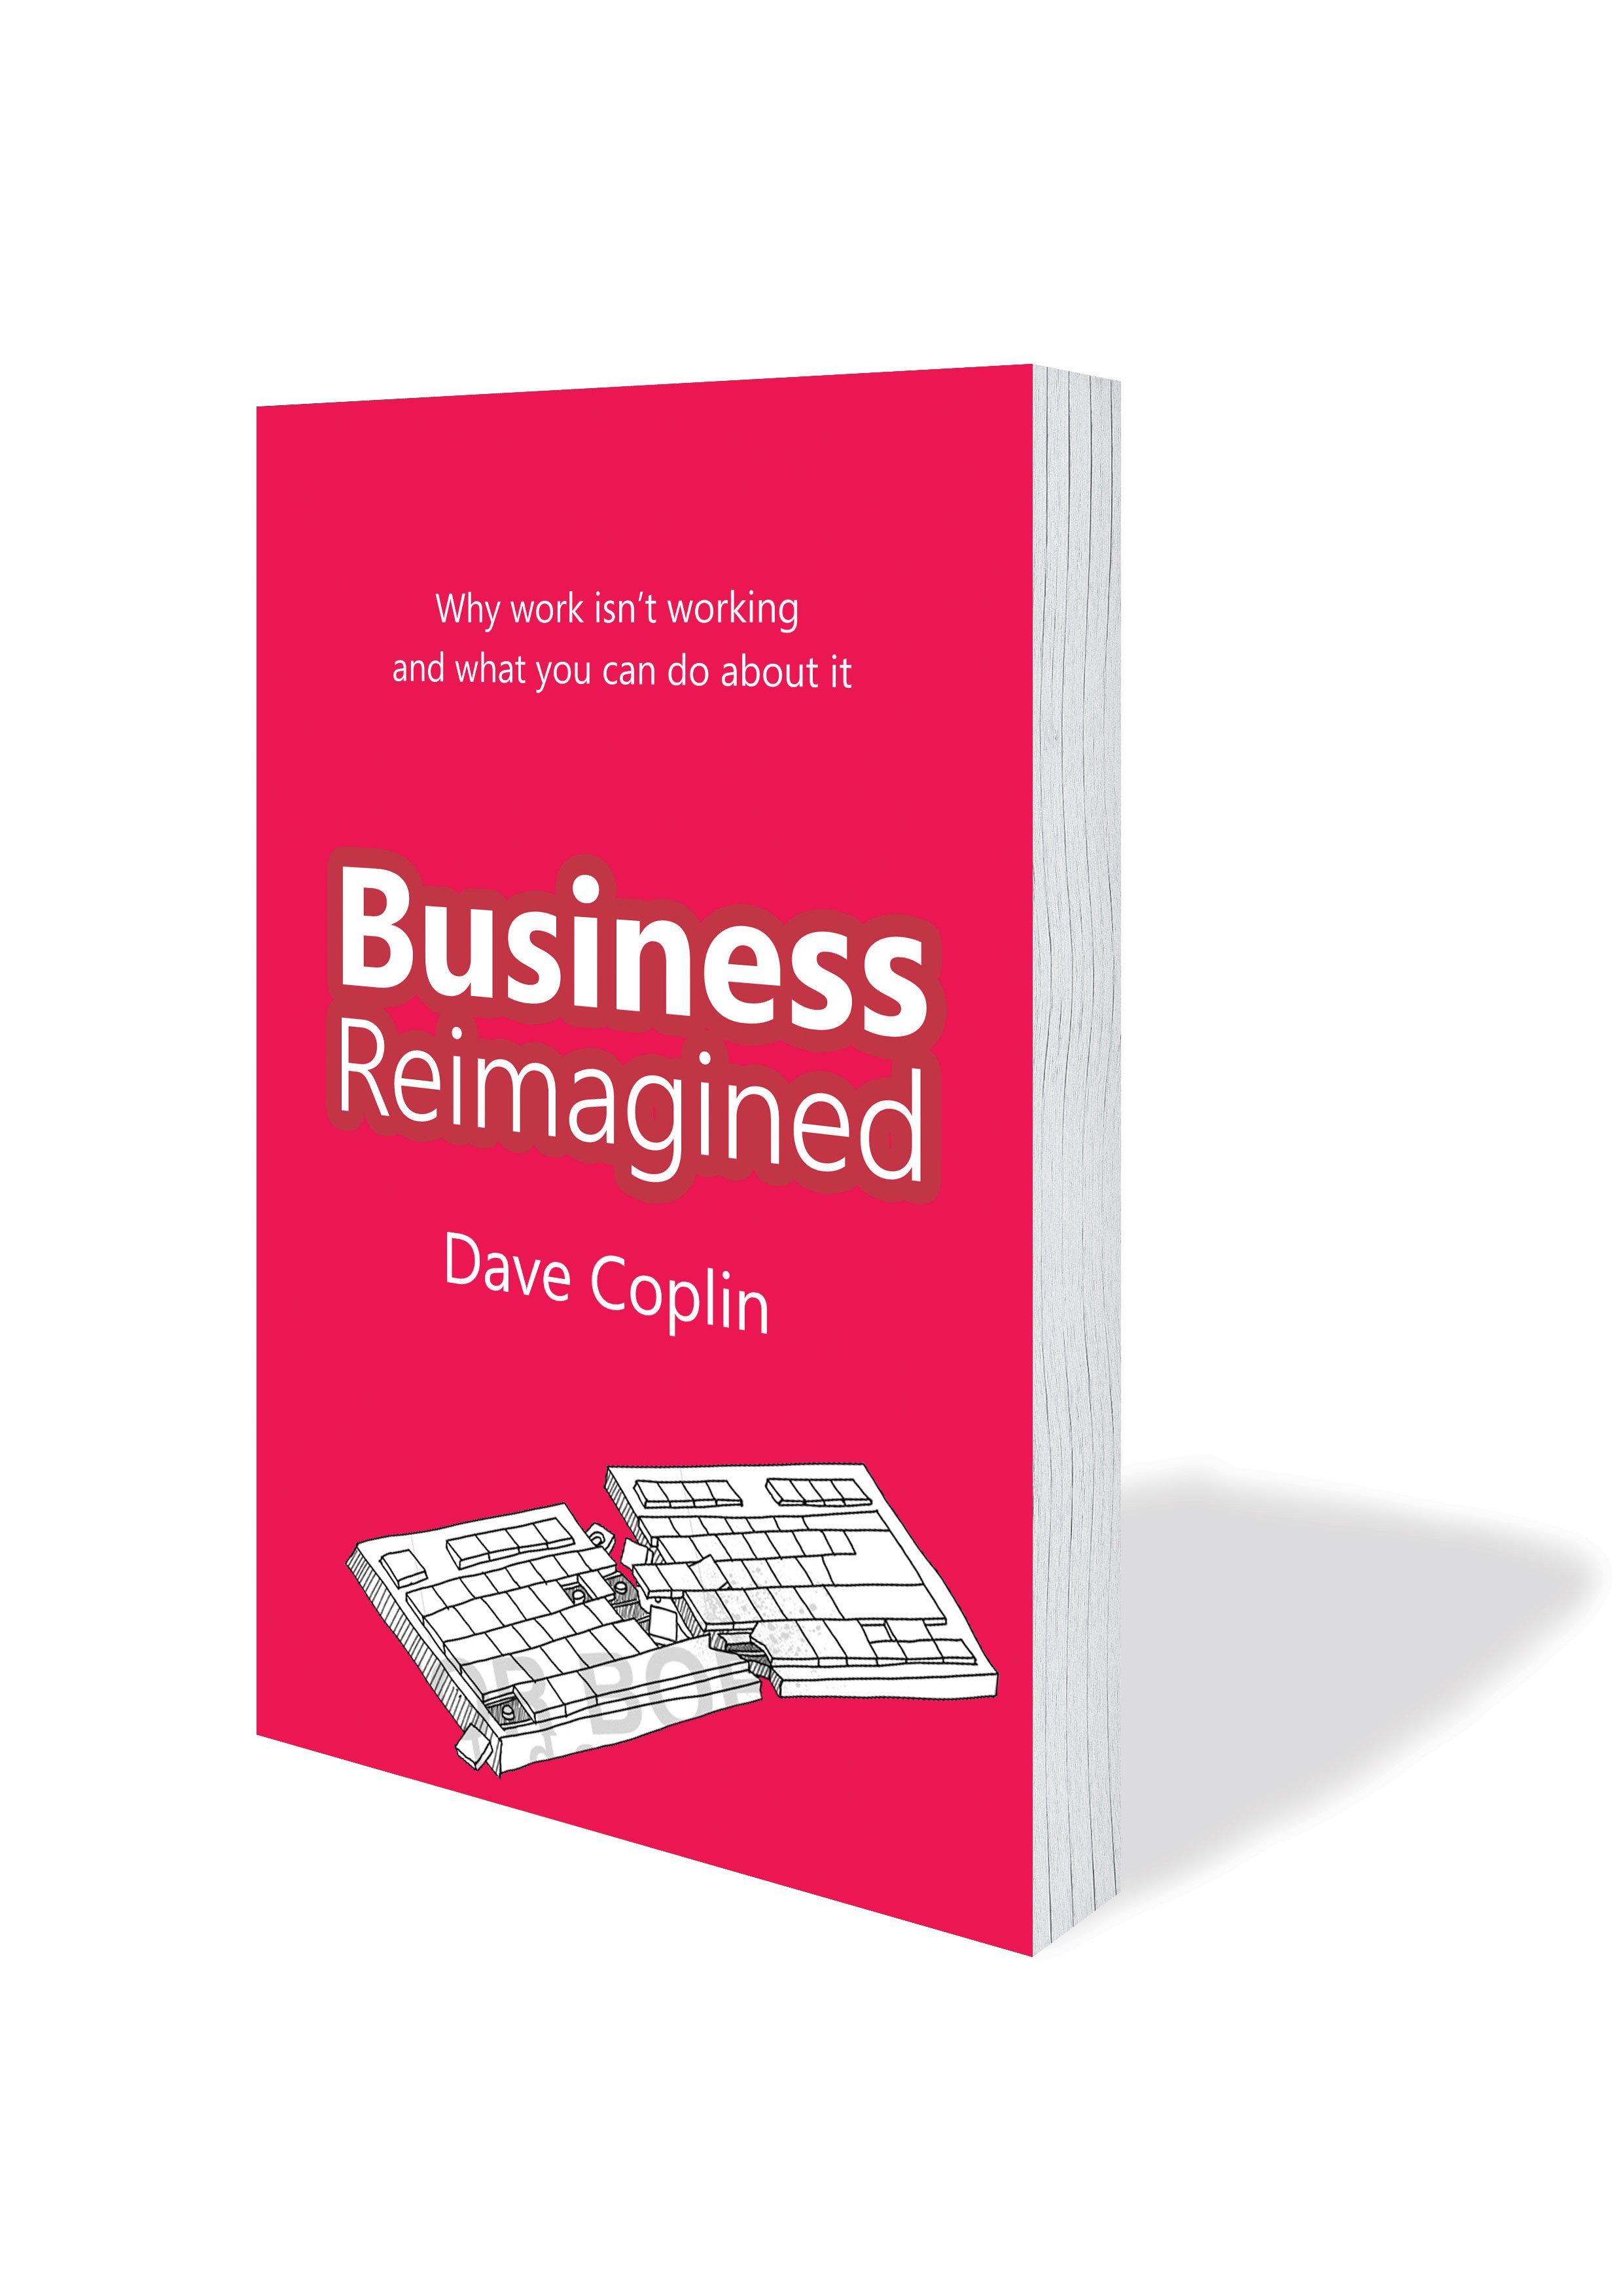 Business Reimagined by Dave Coplin